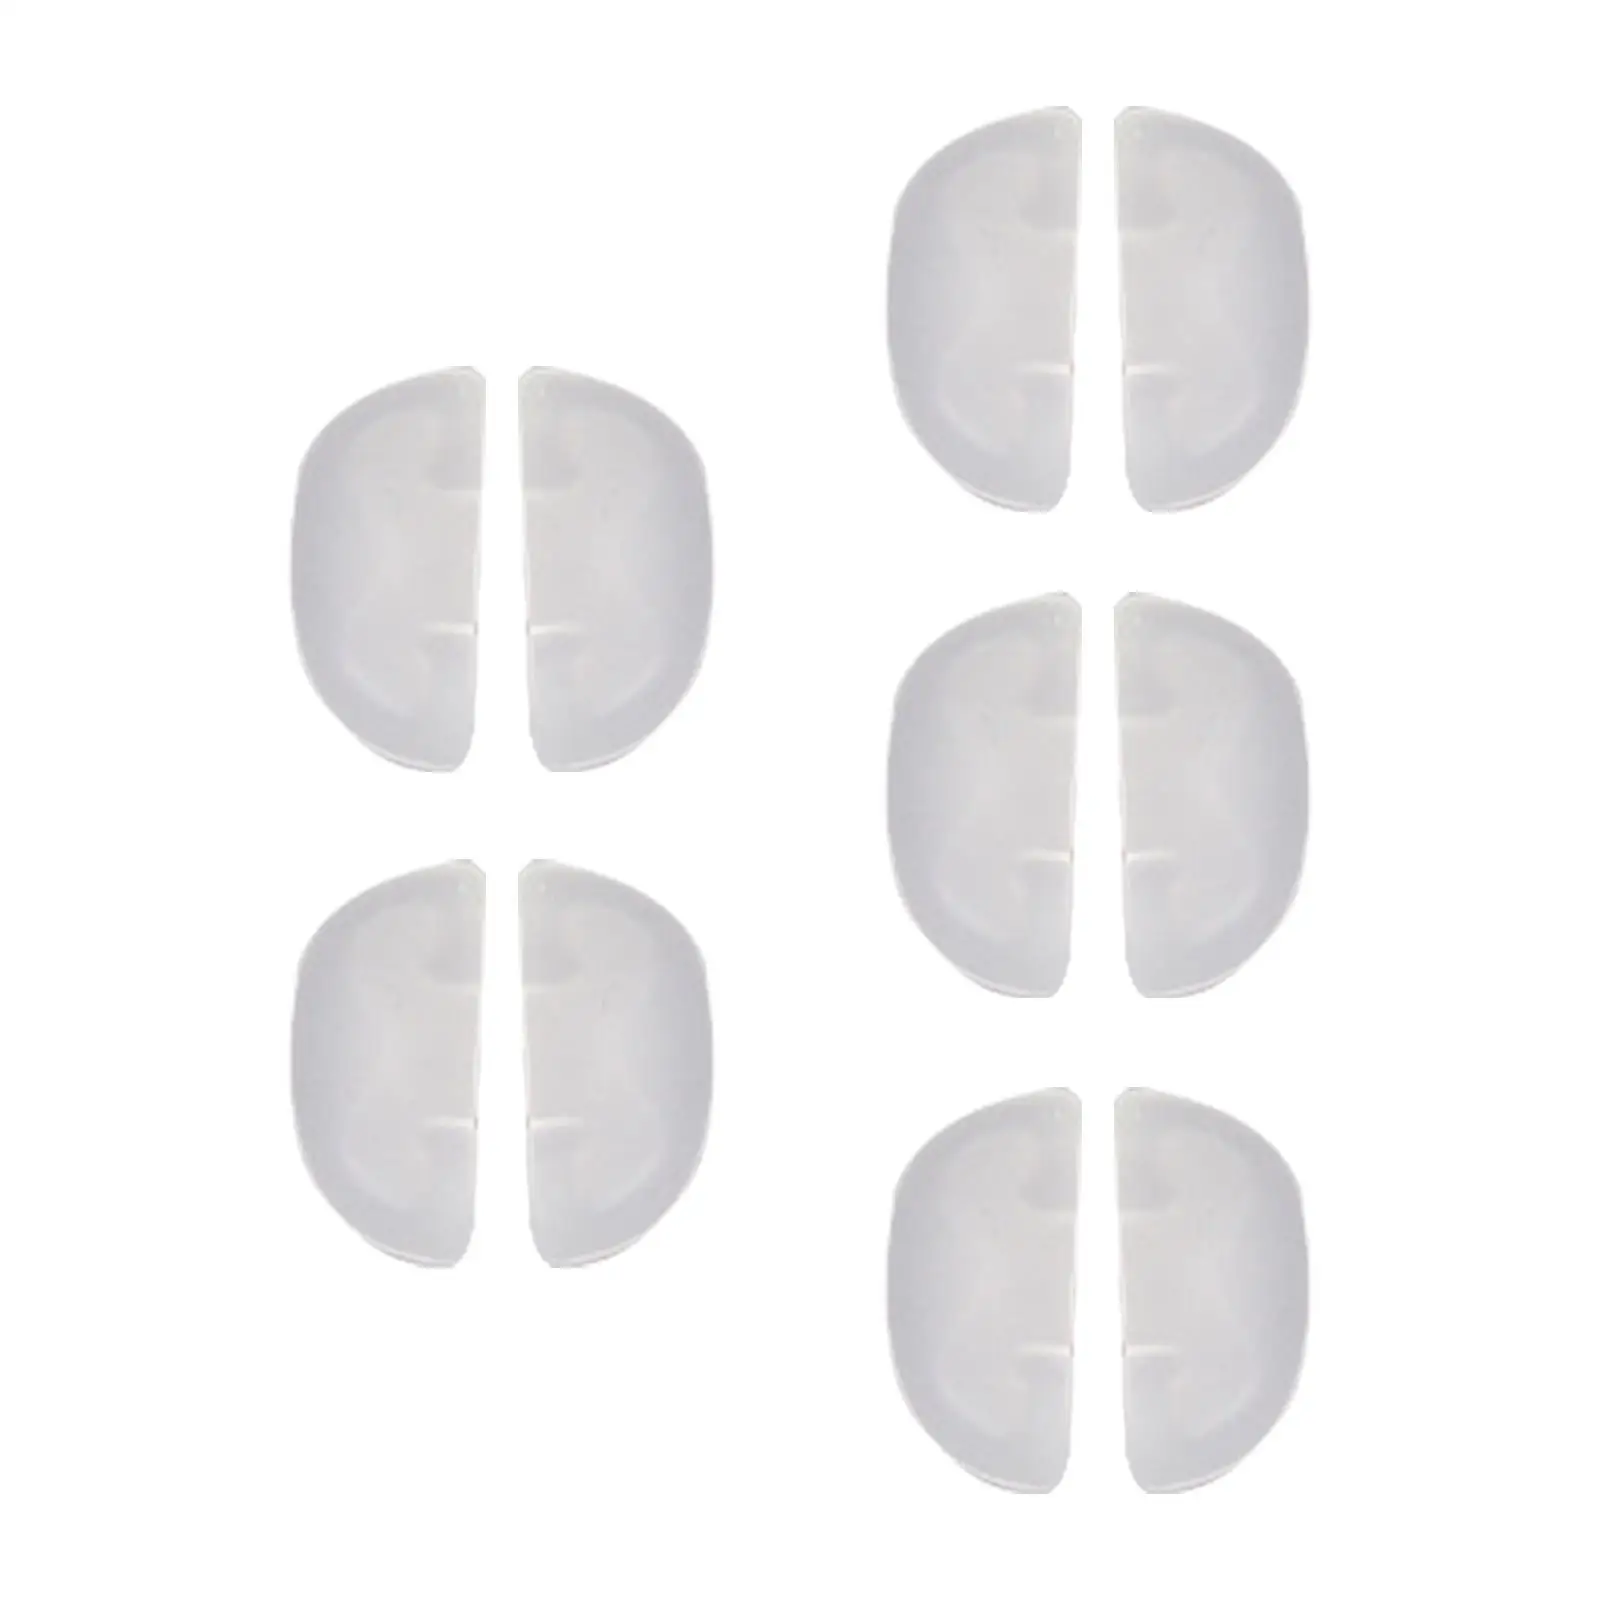 10 Pieces Kids Eyeglass Nose Pads Thickened Replace Parts for Sunglasses